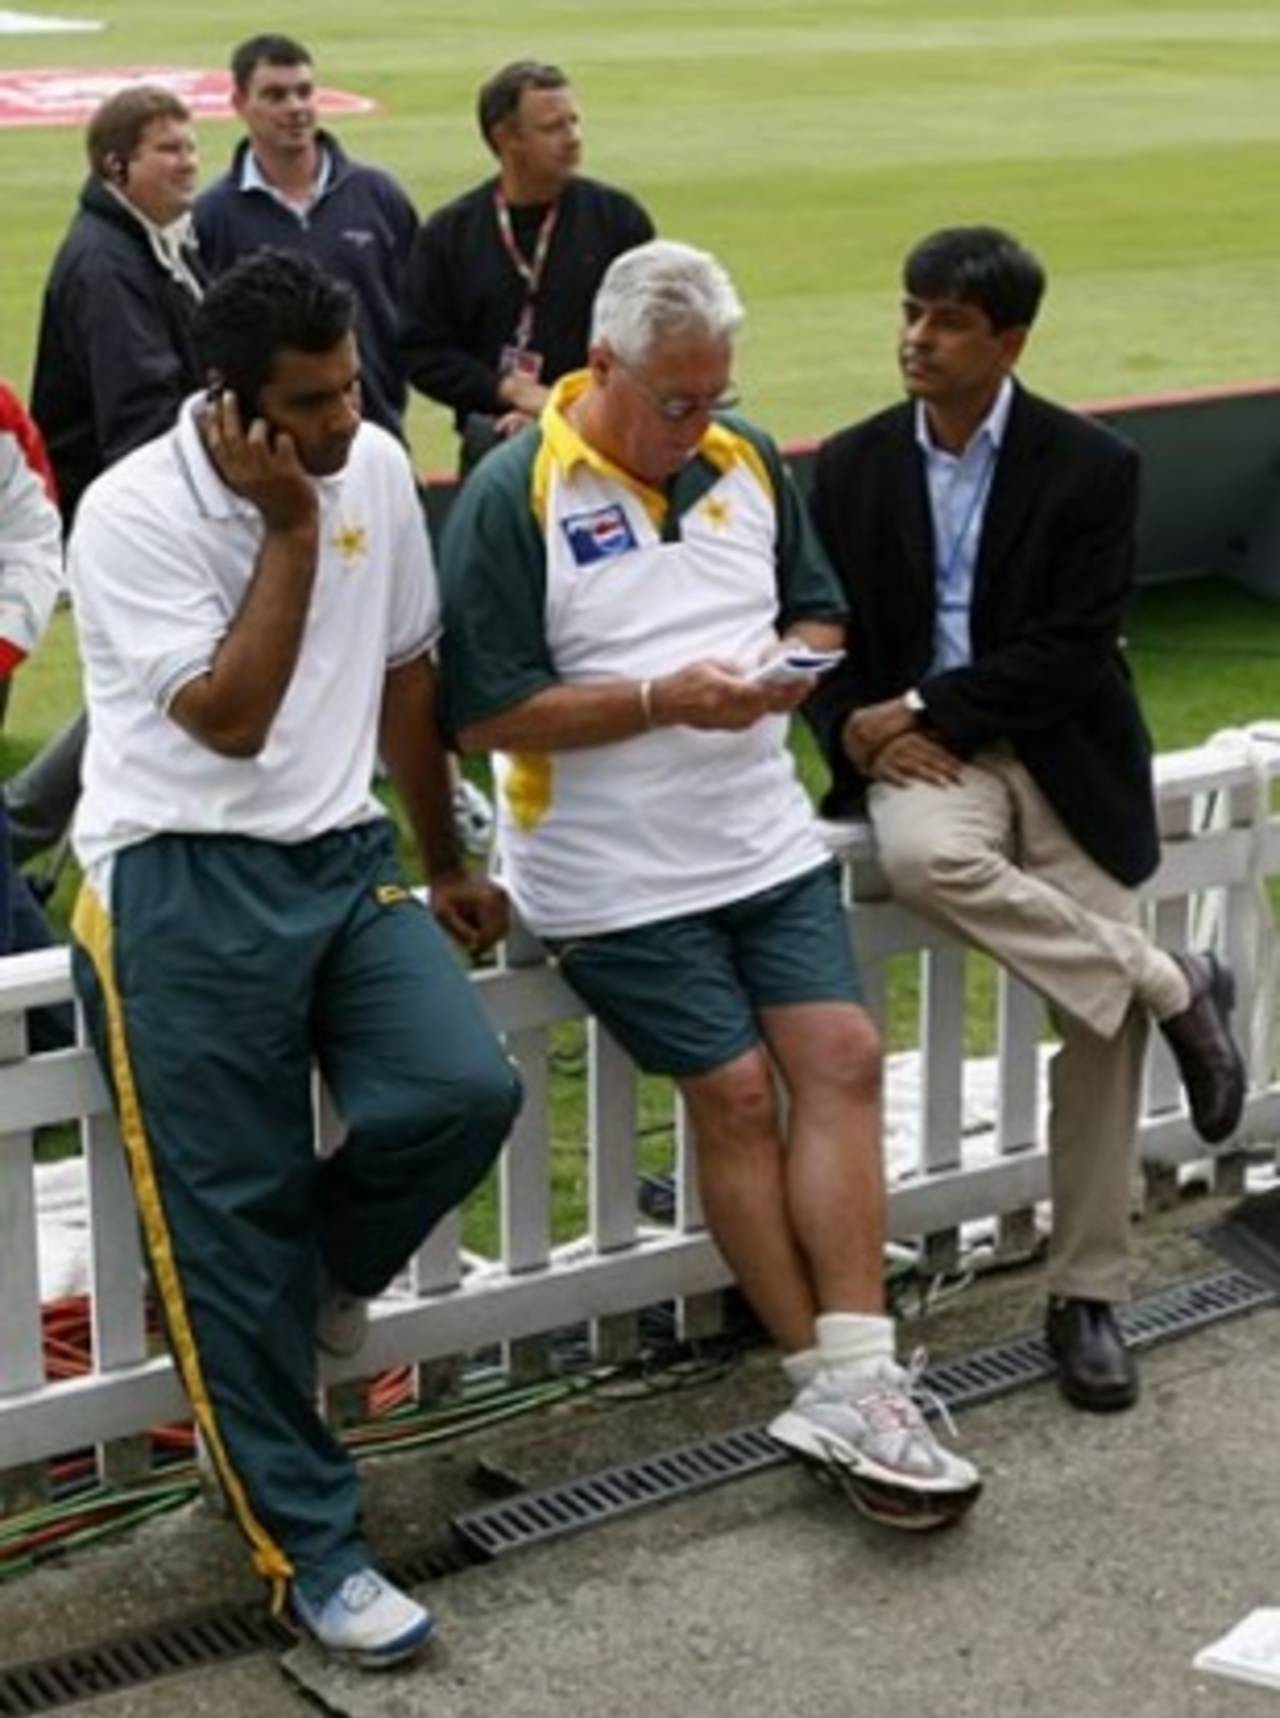 Bob Woolmer and Waqar Younis discuss events on the phone, England v Pakistan, 4th Test, The Oval, August 20, 2006